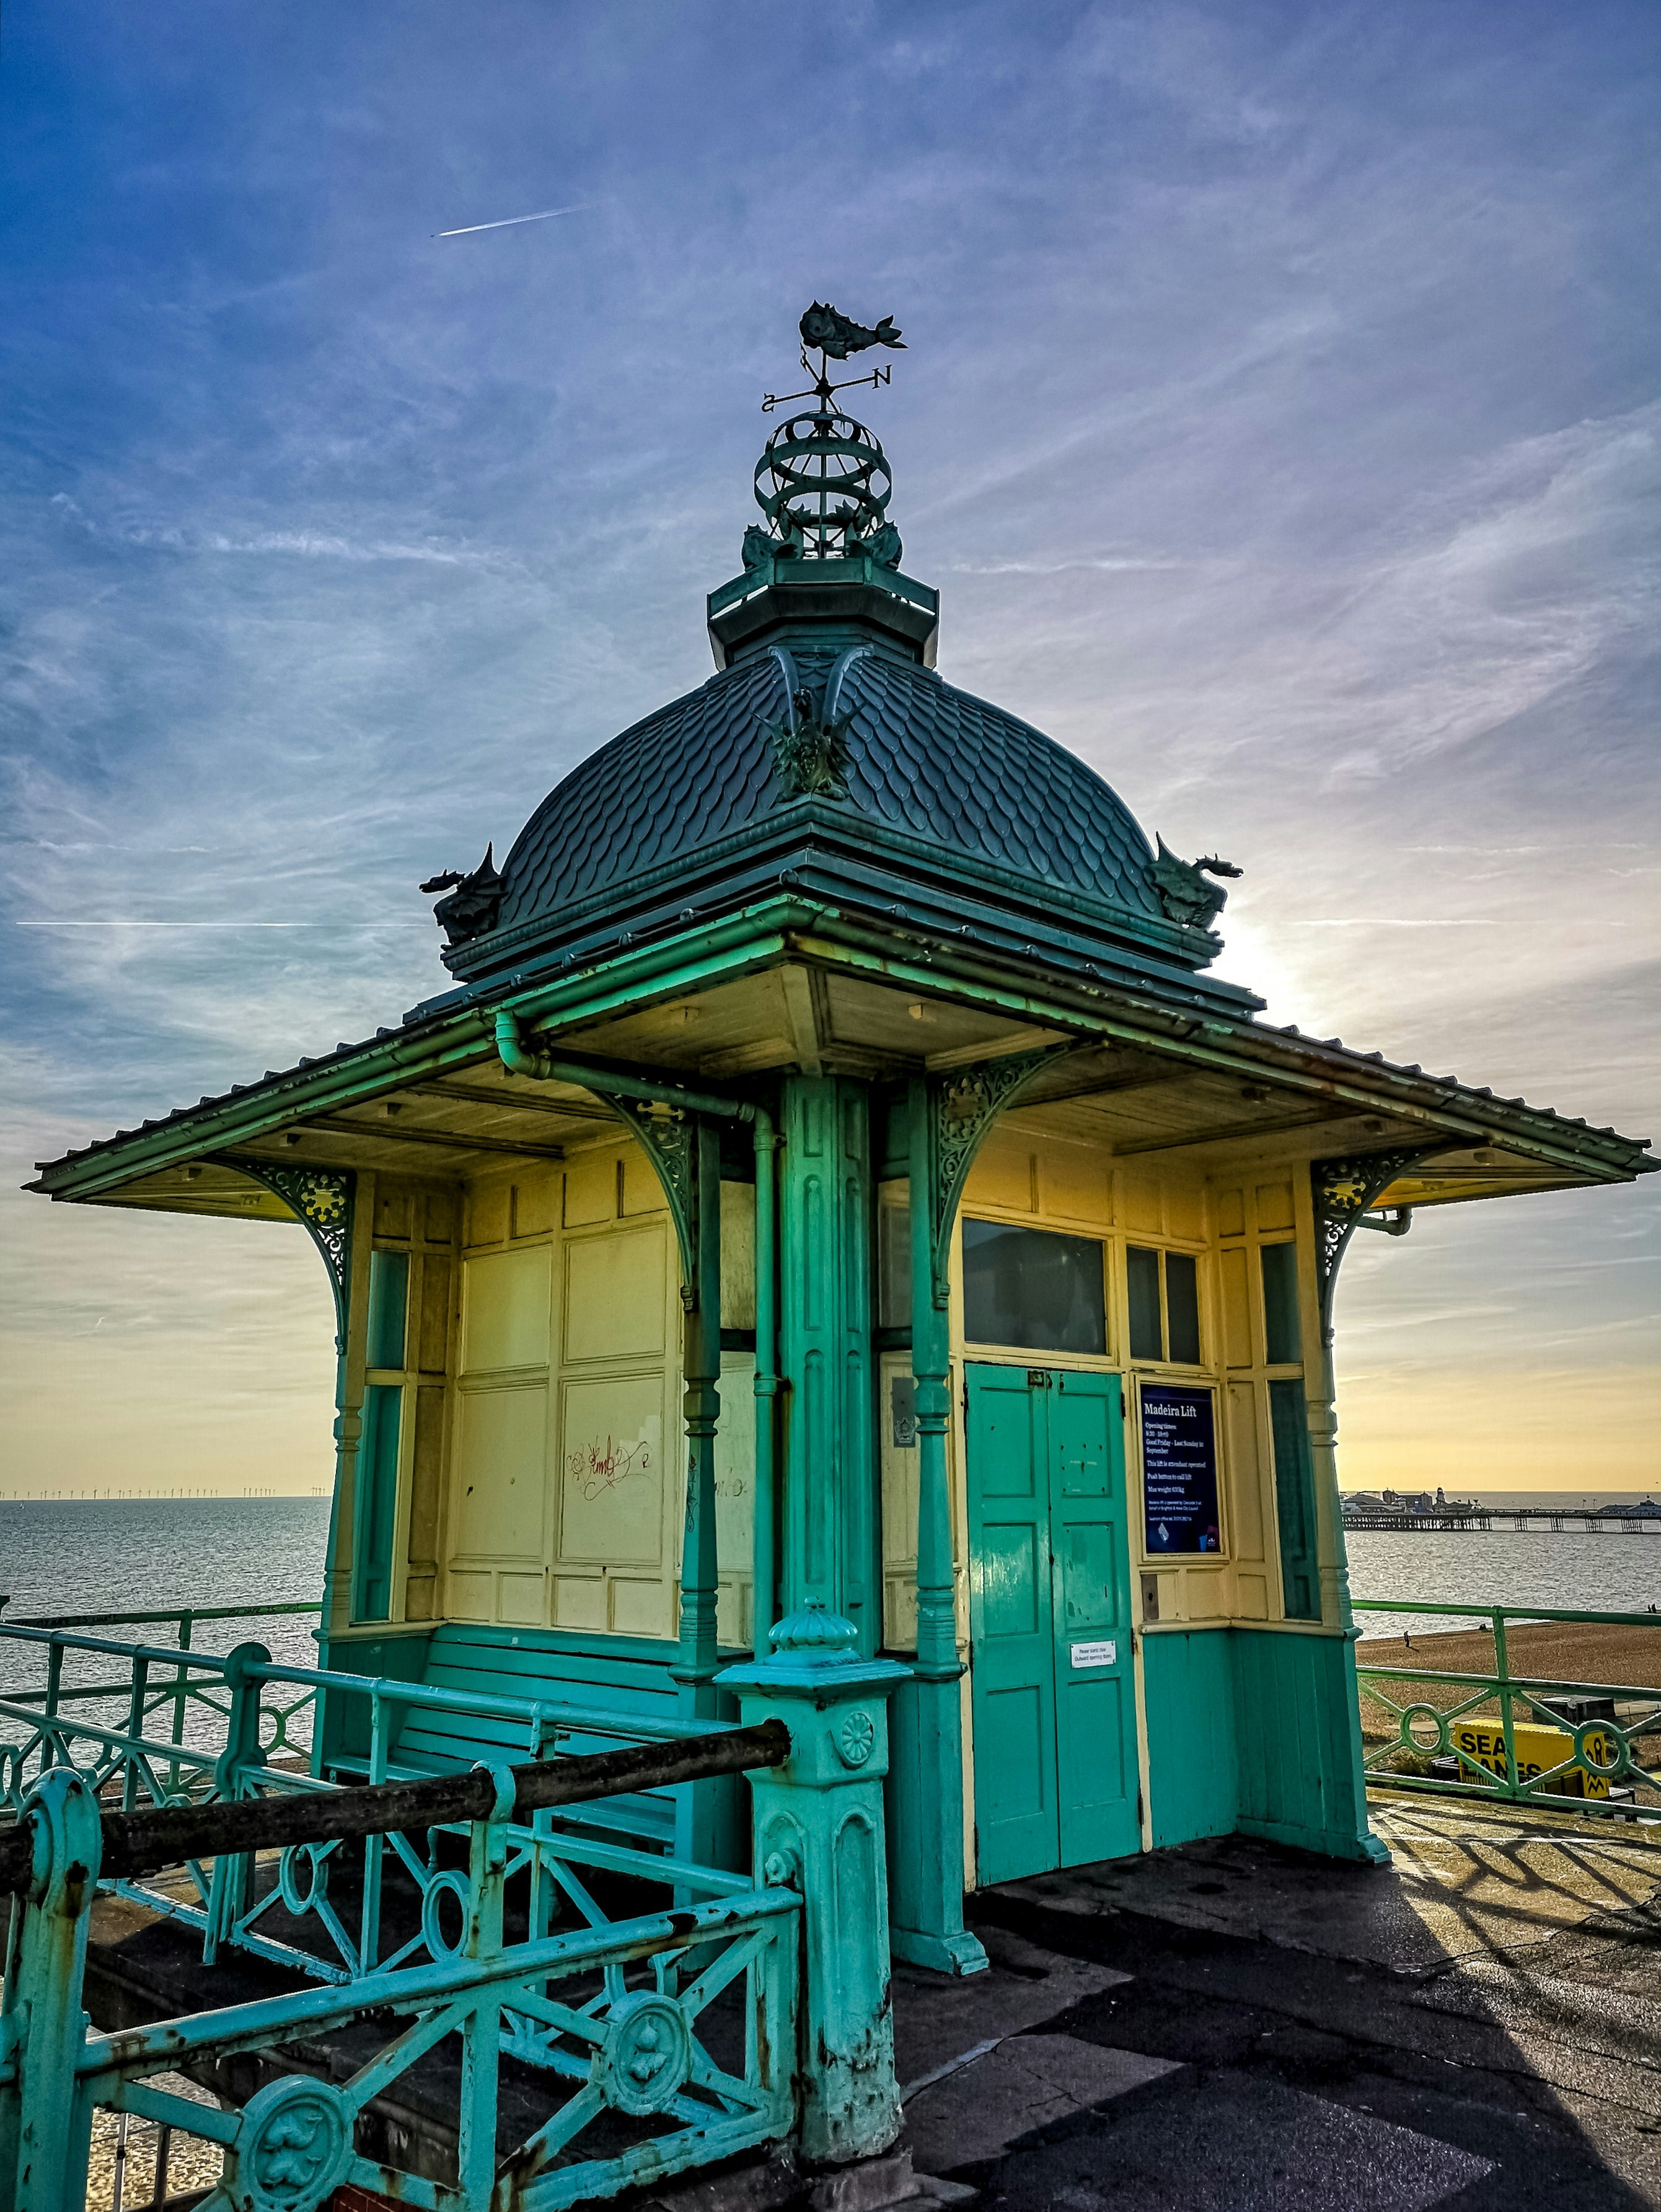 A Victorian elevator standing on the Brighton seafront. It is painted buttermilk yellow and teal blue, and it's topped with a dome and a weather vane.